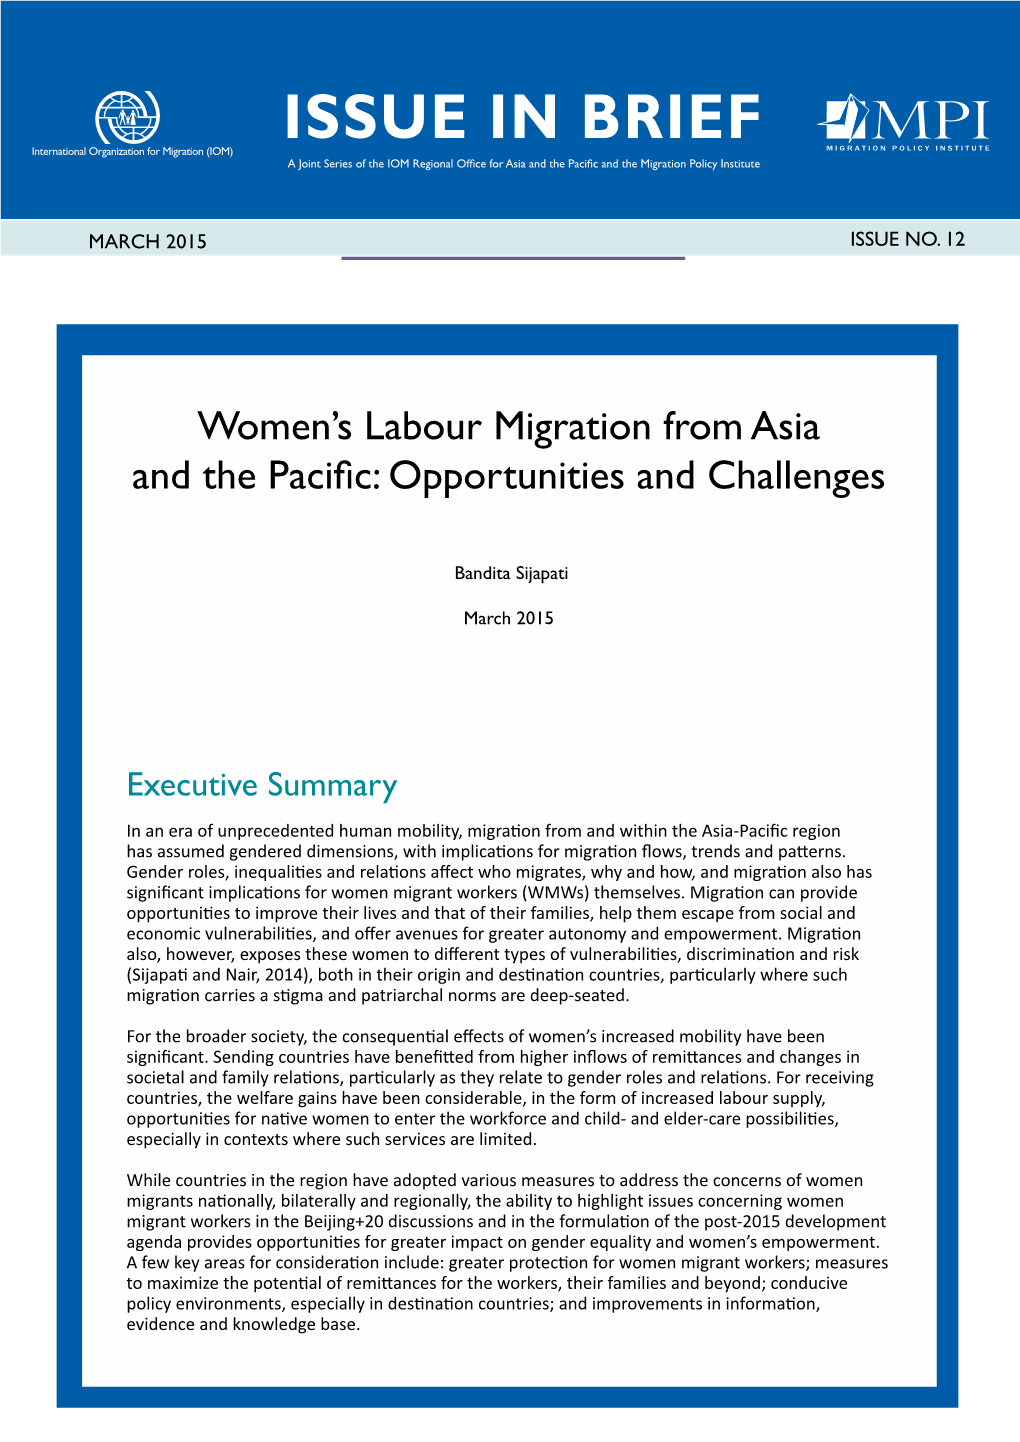 Women's Labour Migration from Asia and the Pacific: Opportunities and Challenges